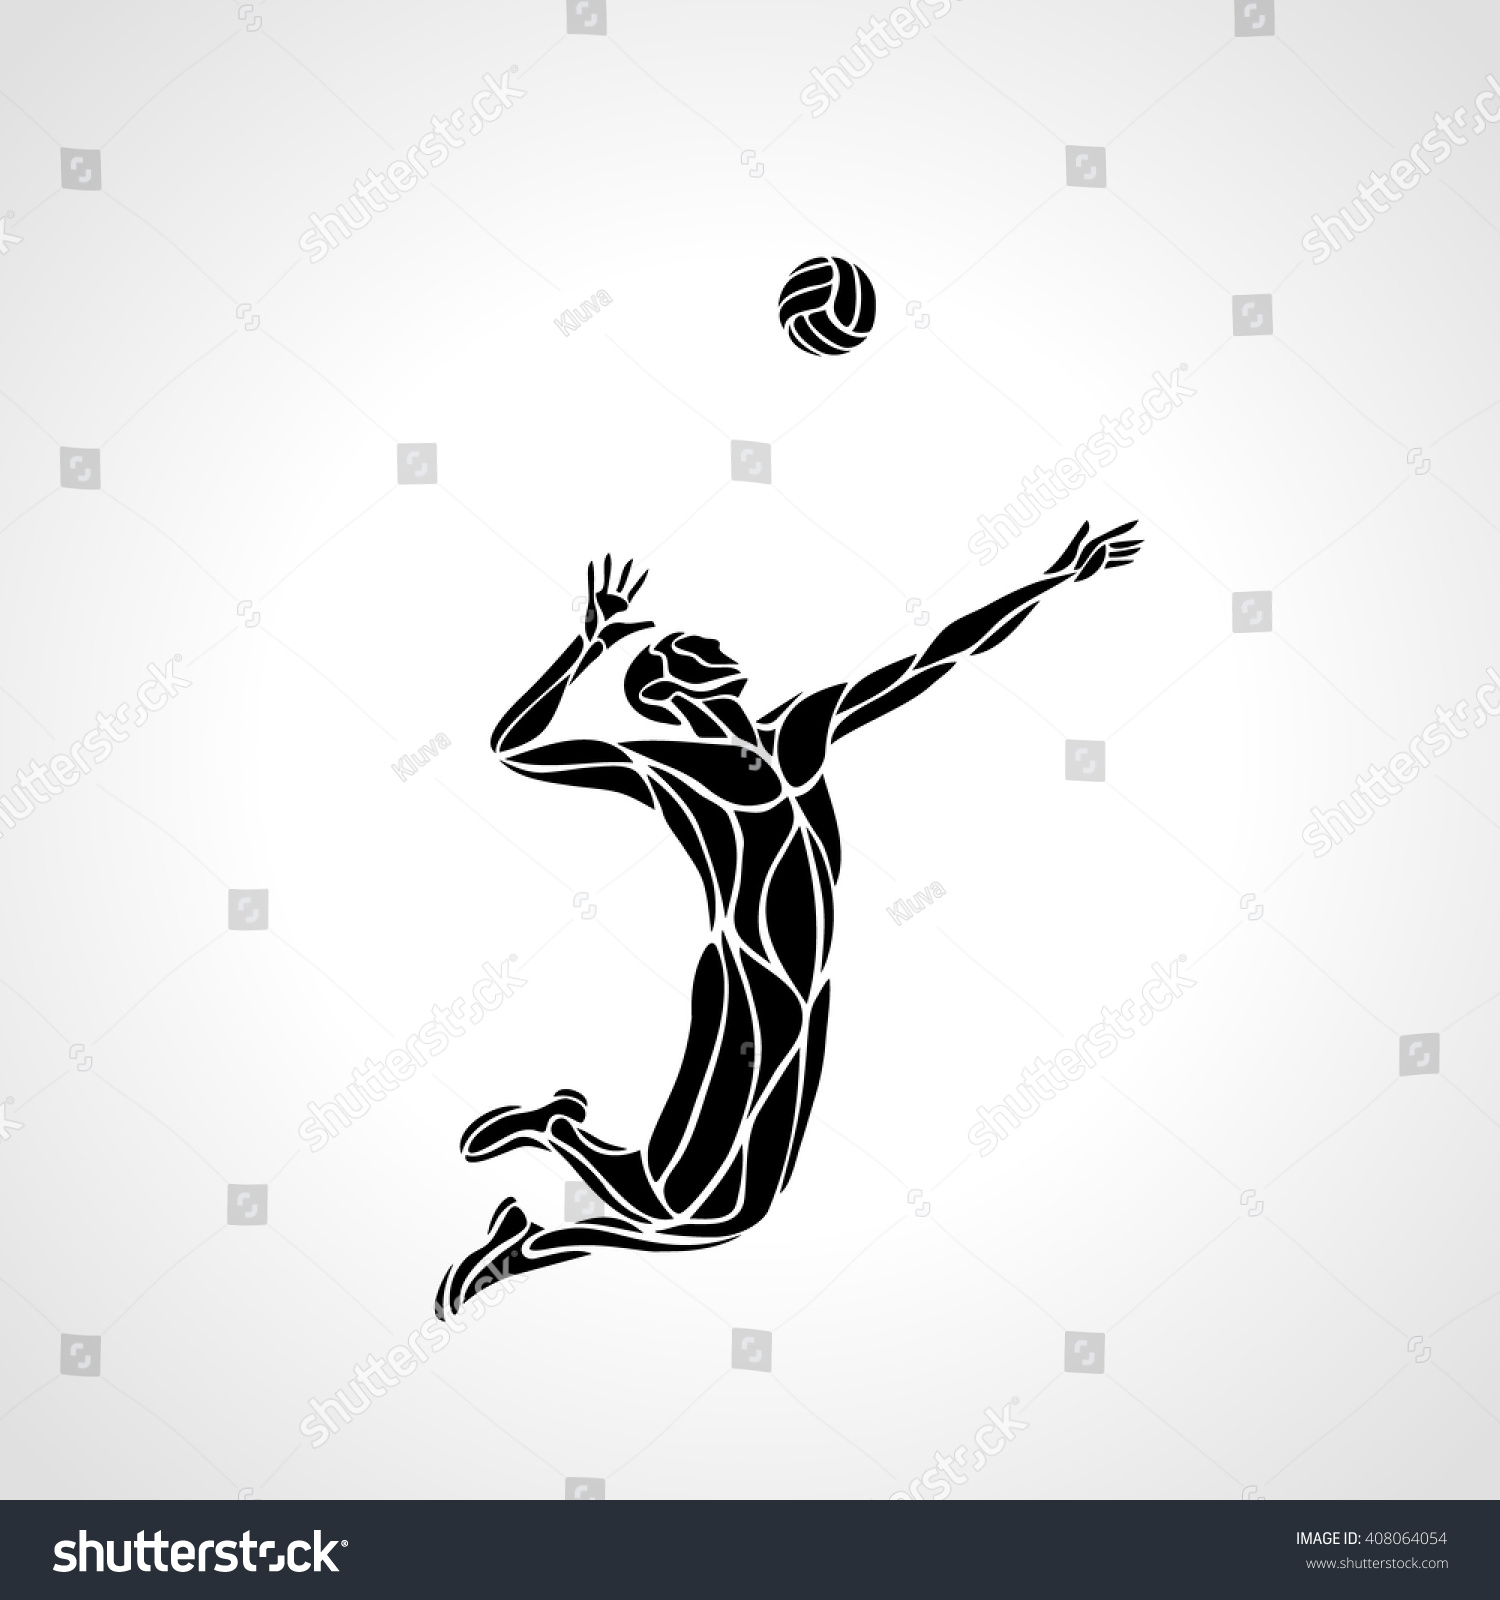 Volleyball Player Serving Ball Black Vector Stock Vector (Royalty Free ...